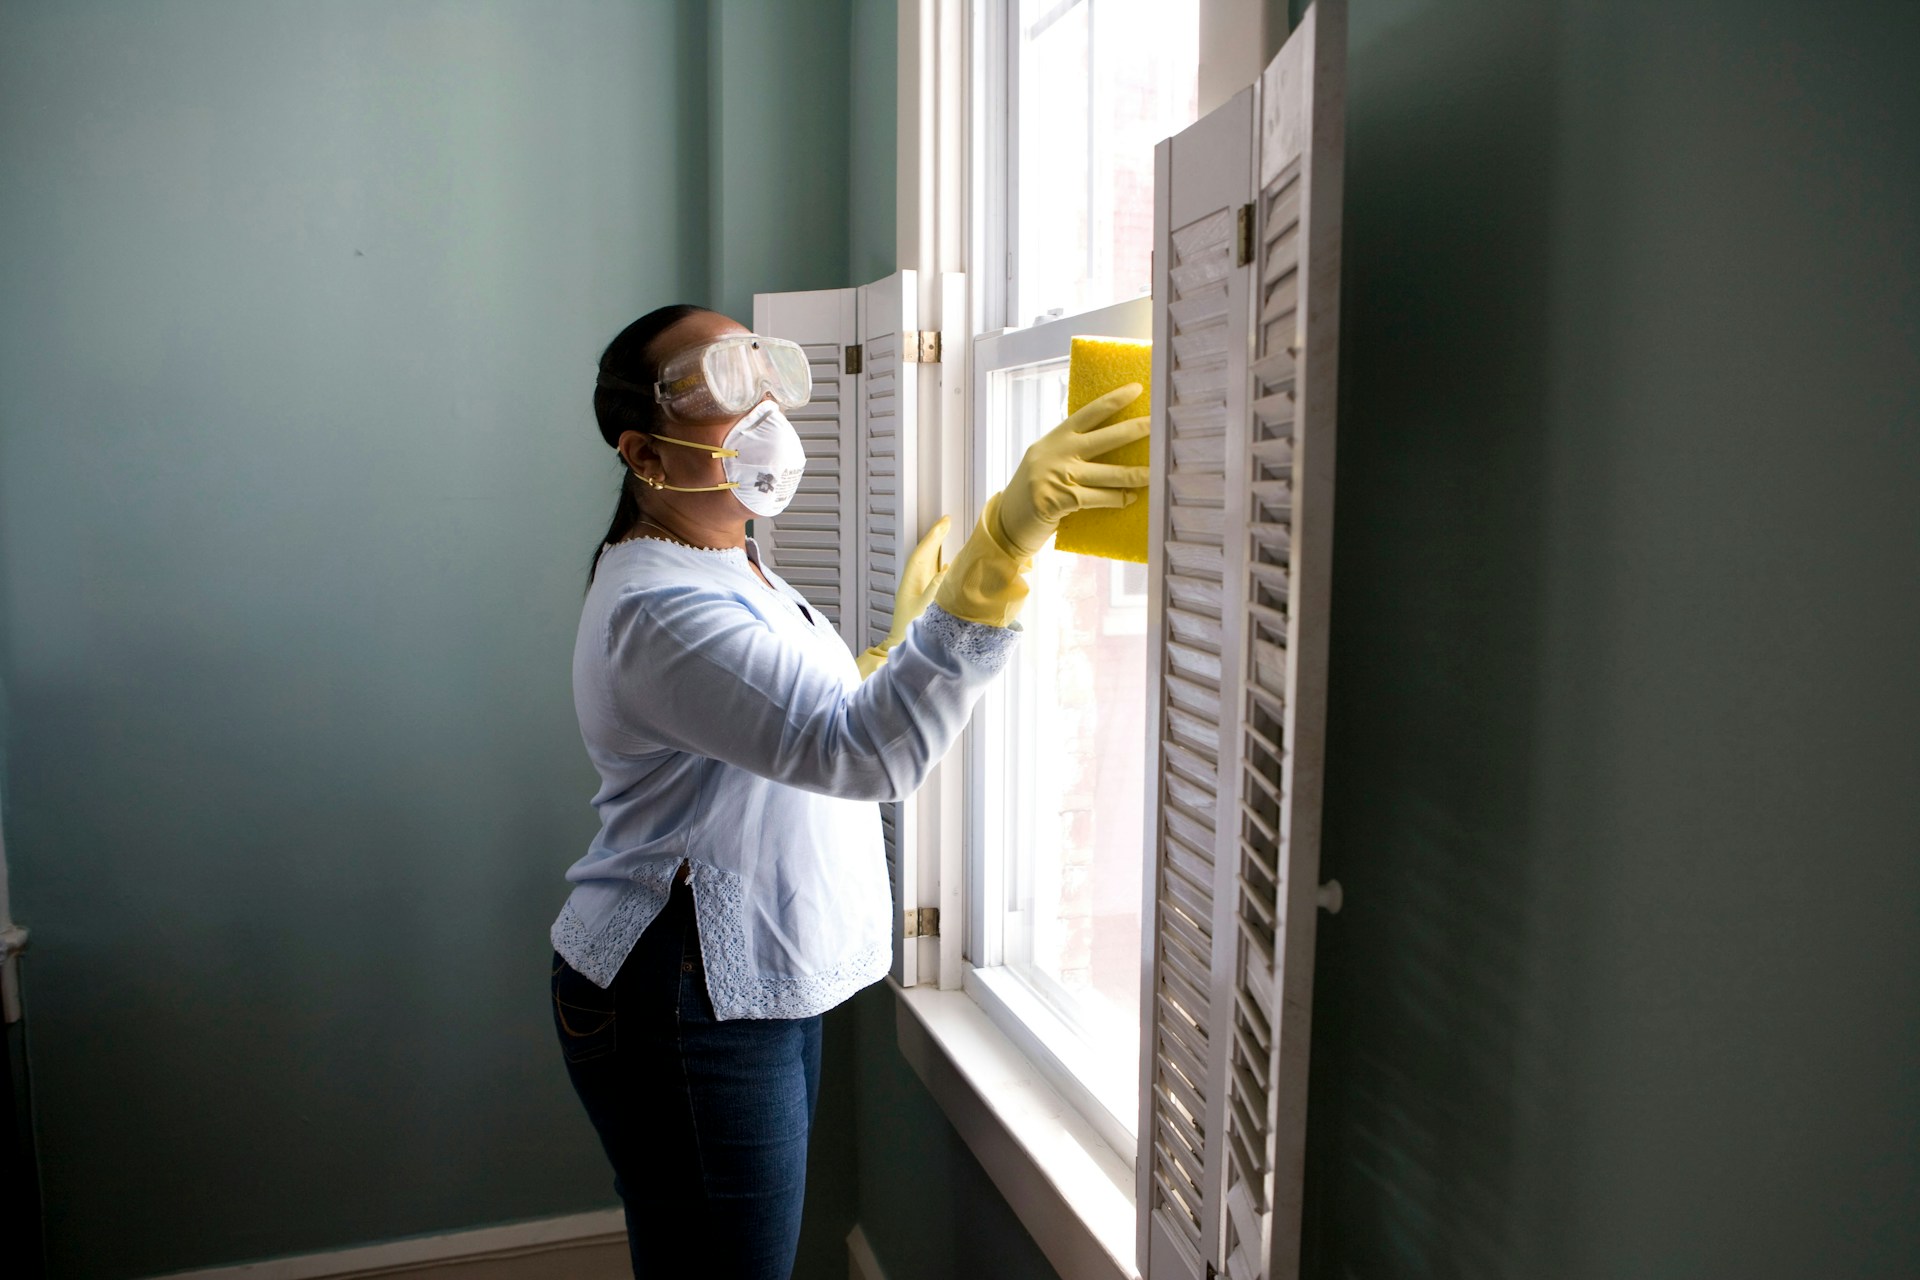 5 Signs It’s Time to Hire a Professional Home Cleaner